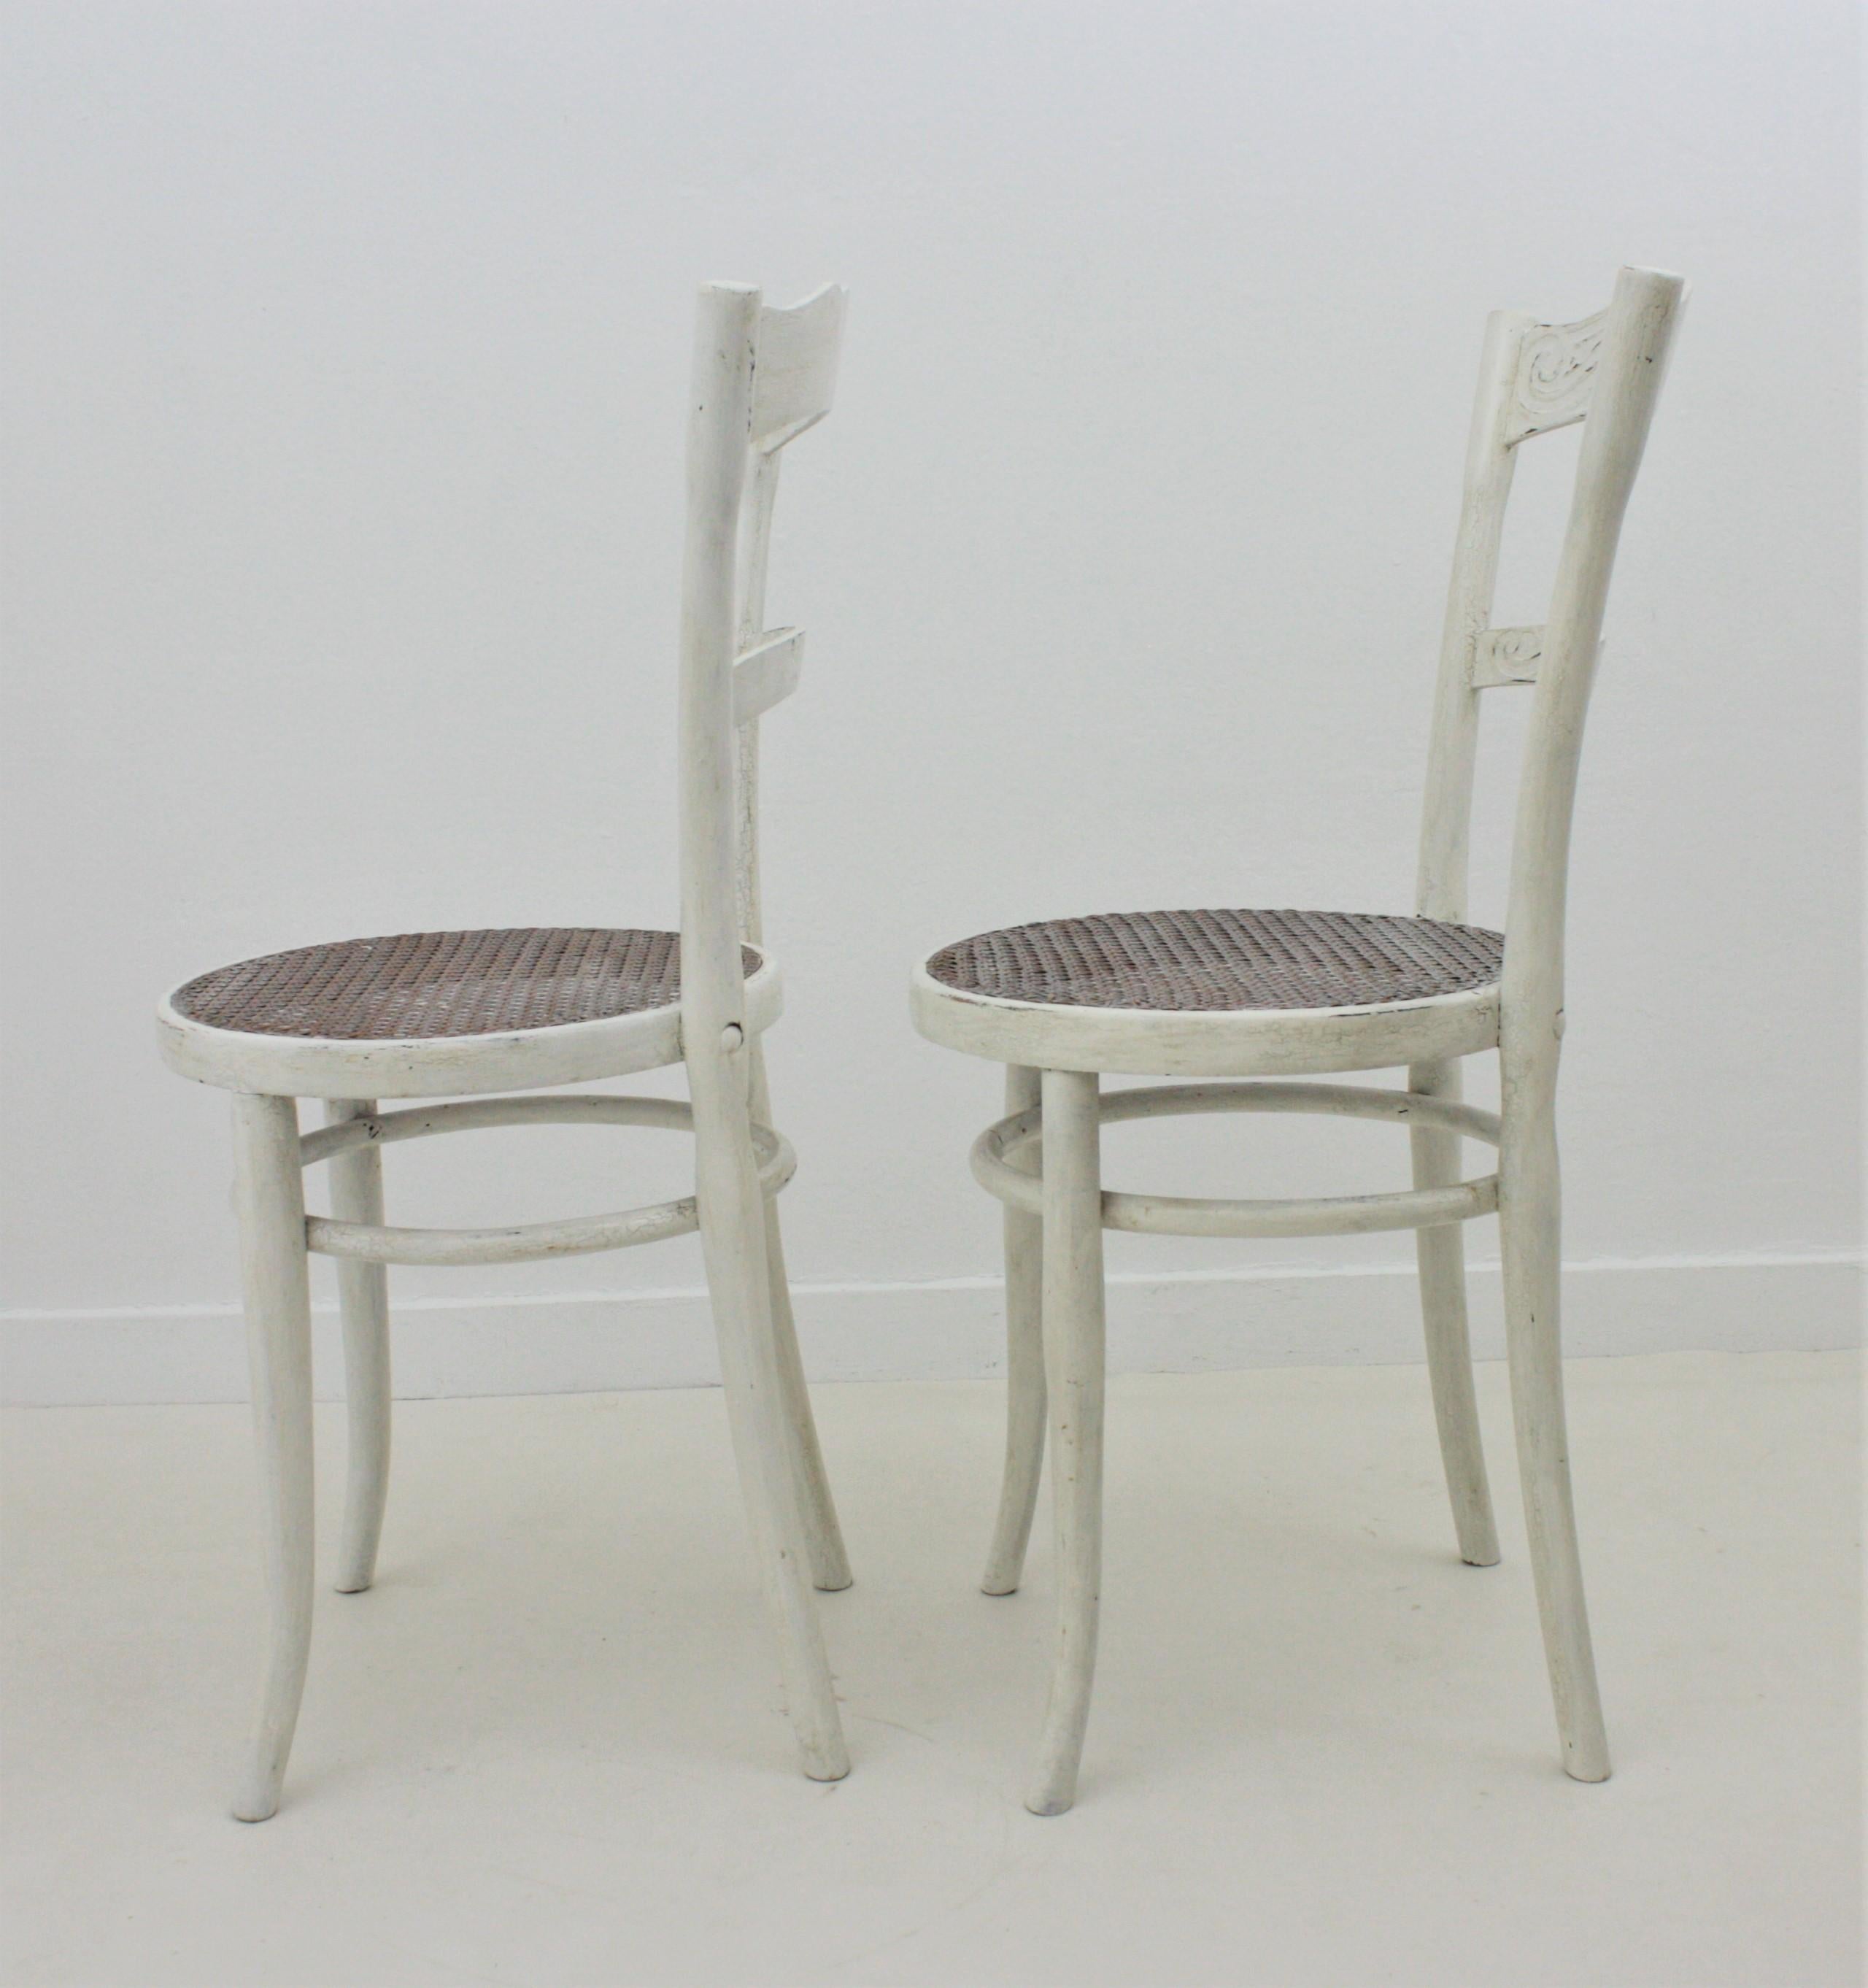 Jacob & Josef Kohn Vienna Secession Patinated Chairs with Wicker Seats, Pair For Sale 2